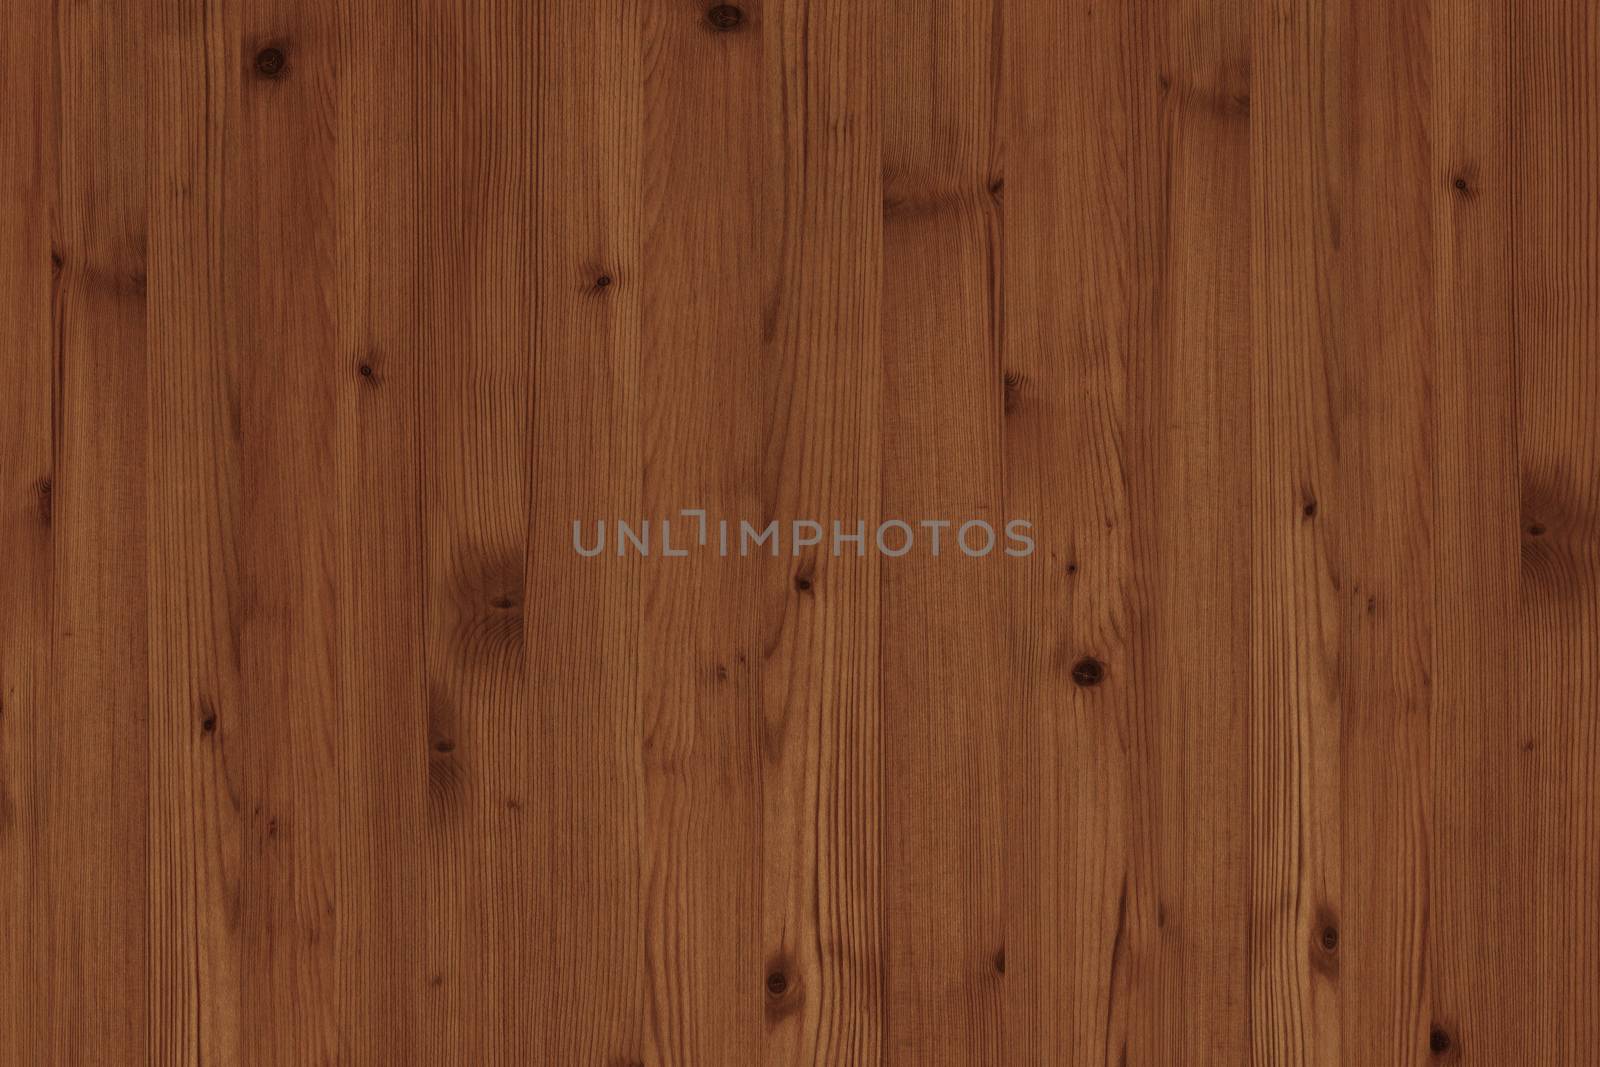 Wood texture with natural patterns, brown wooden texture